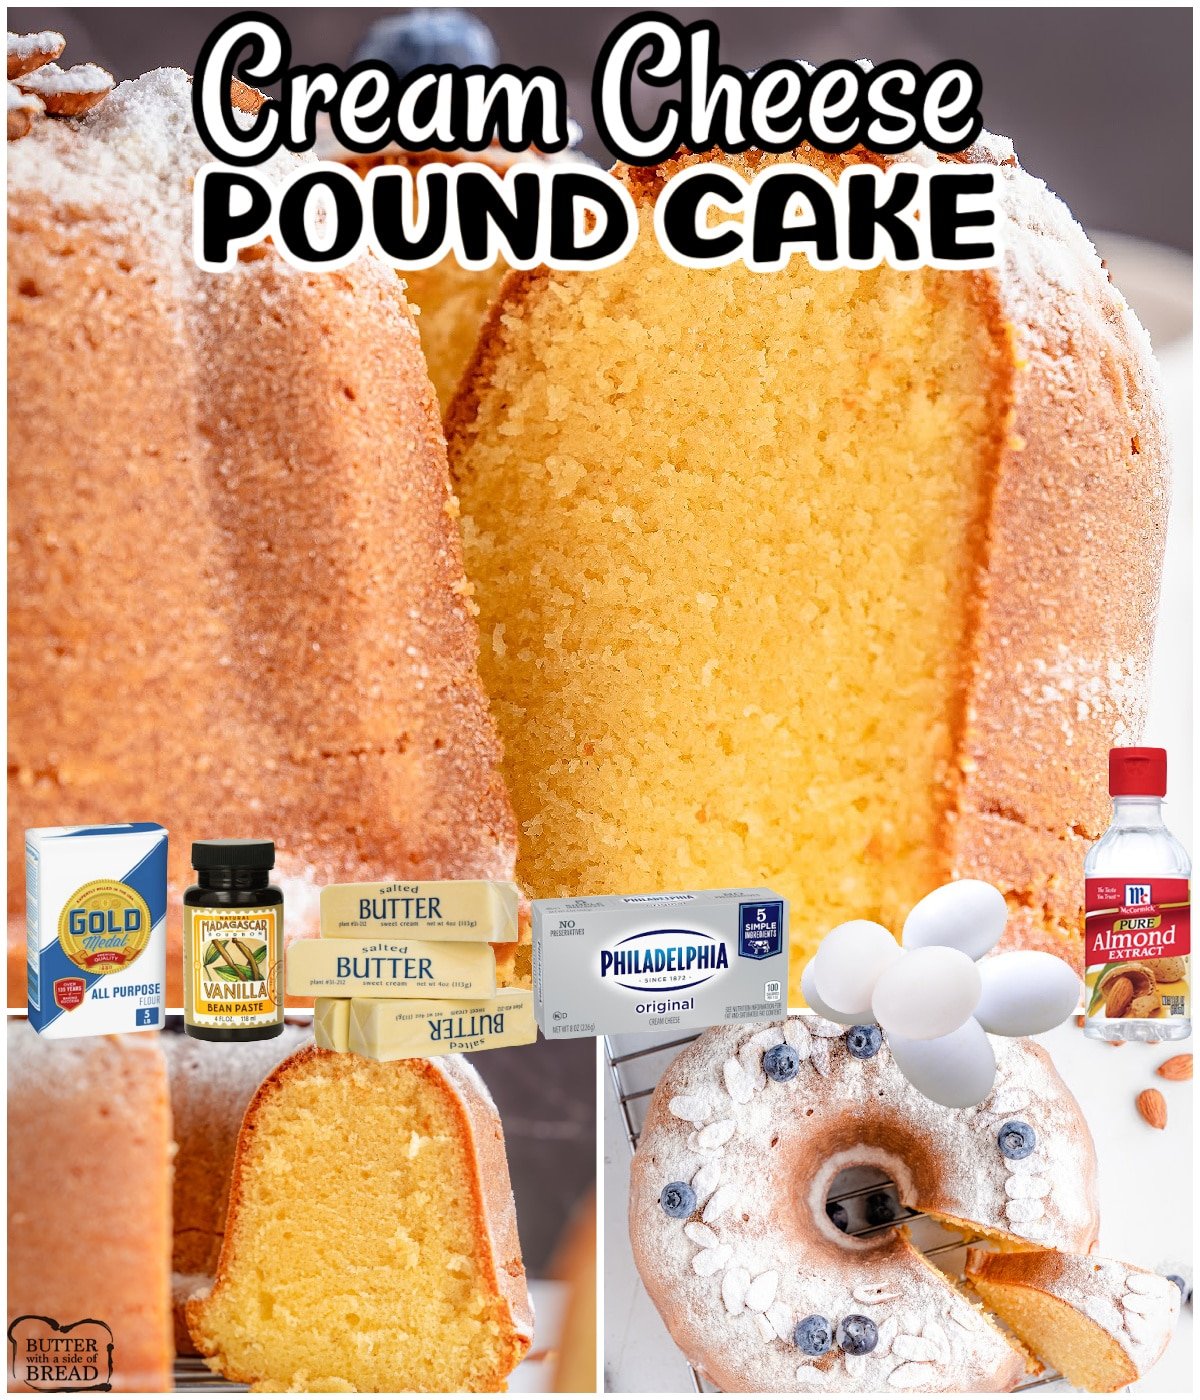 Buttery Cream Cheese Pound Cake has a light, moist texture and amazing butter almond vanilla flavors! Dust with powdered sugar and serve with fresh berries for a delightful treat! 